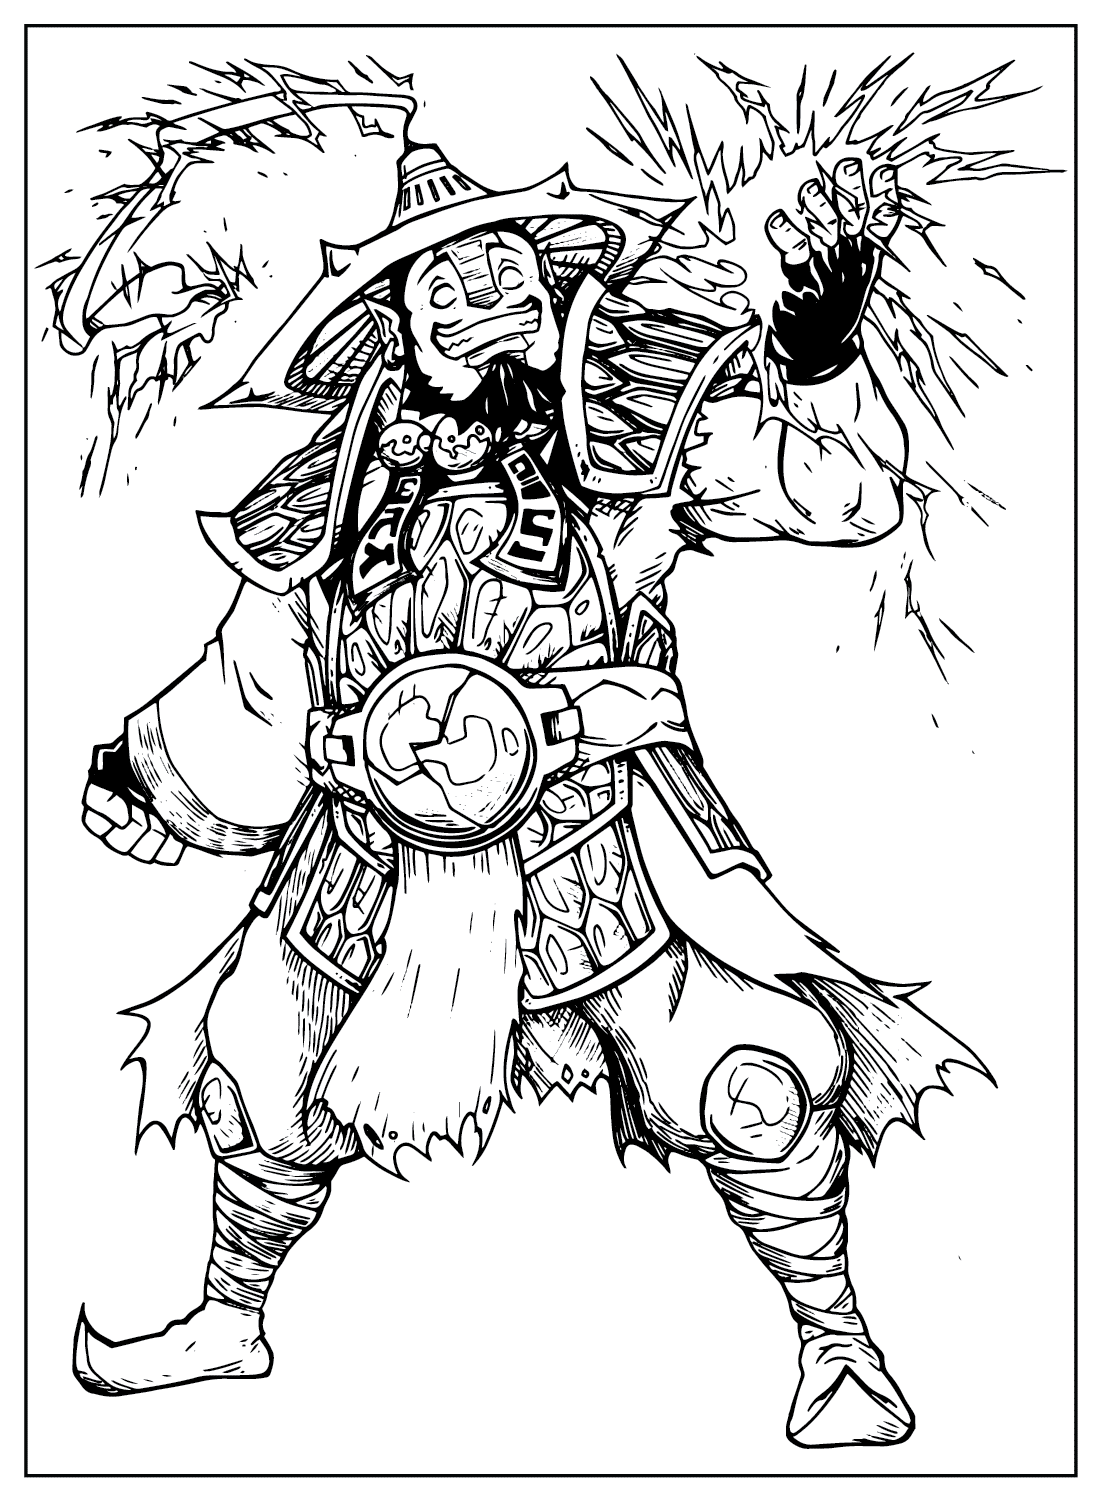 Dota 2 Storm Spirit Coloring Page from Dota 2